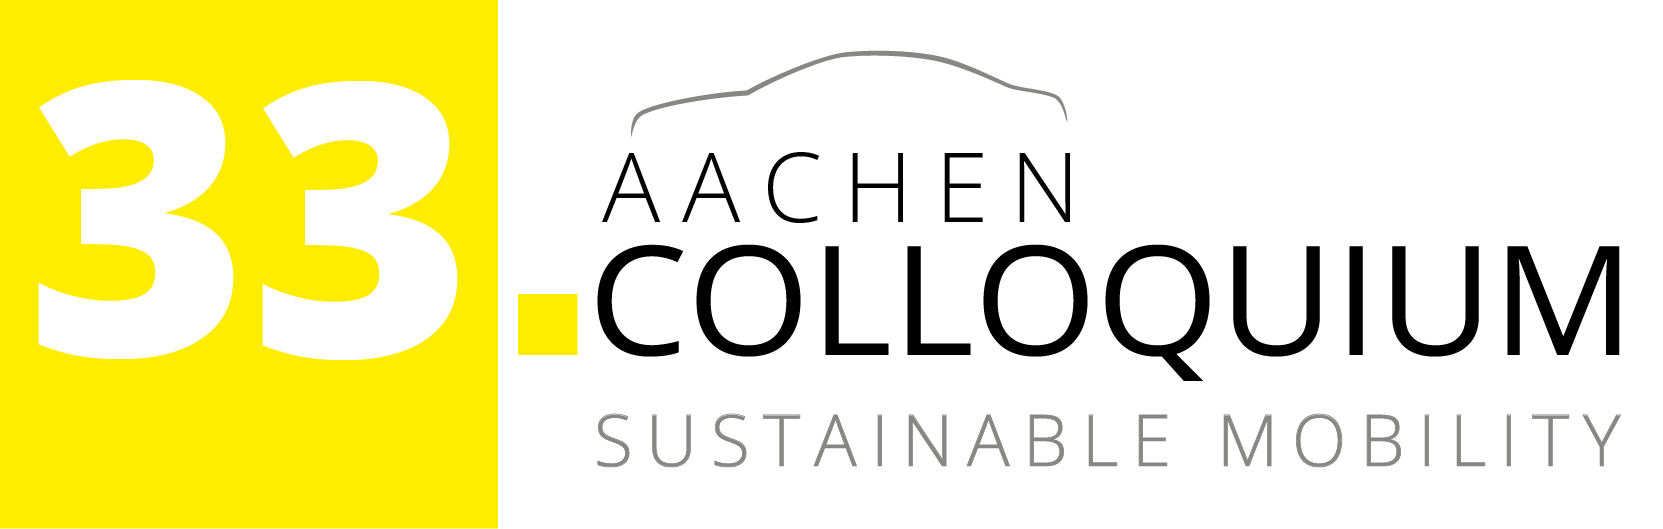 Aachen Colloquium Sustainable Mobility